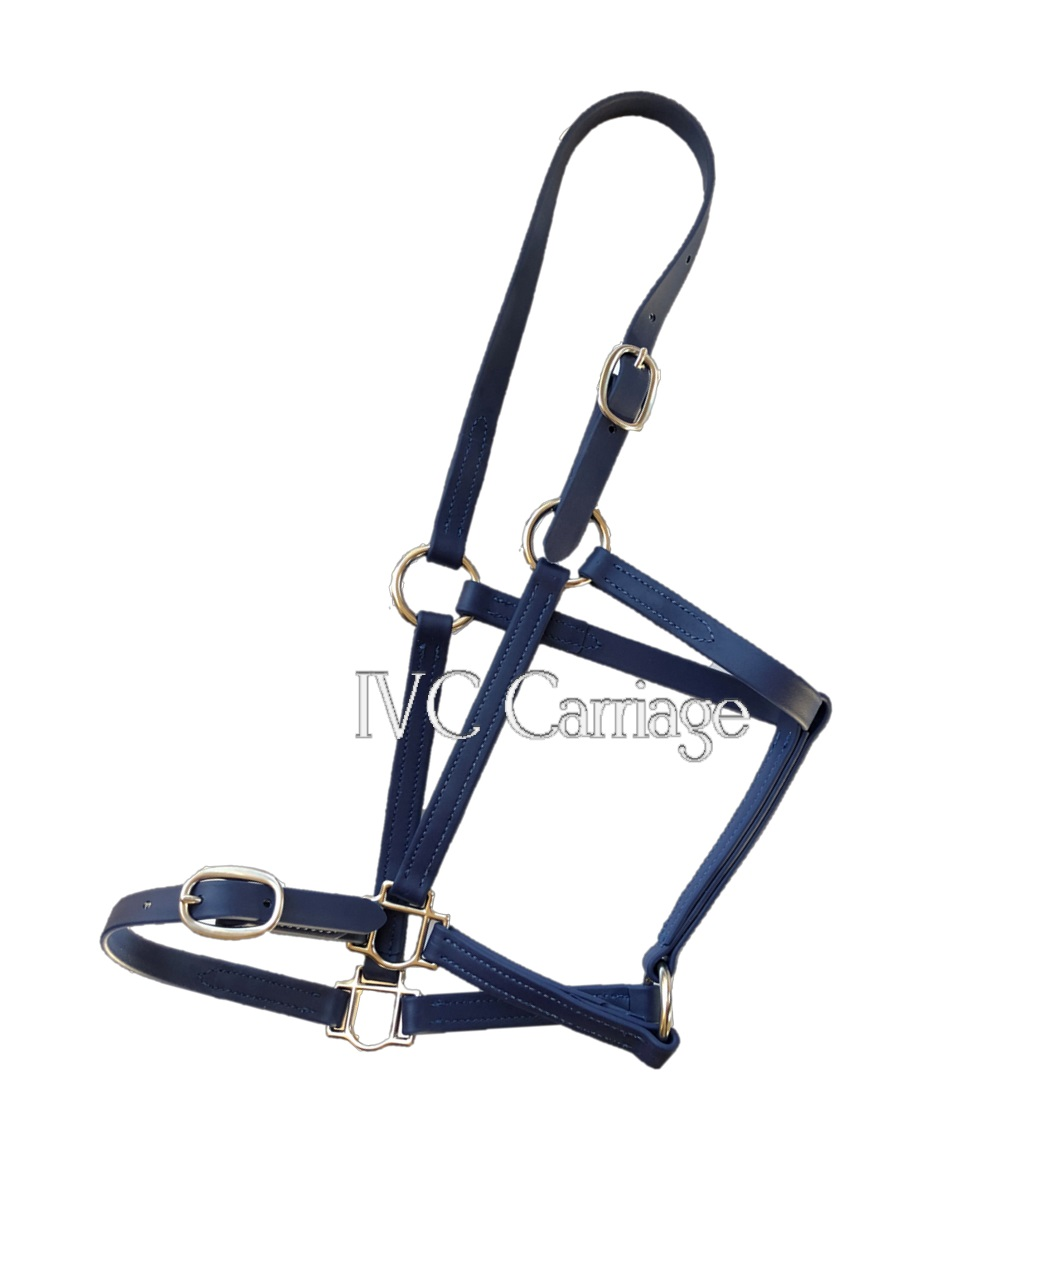 Nose Buckle Beta Horse Halter | IVC Carriage